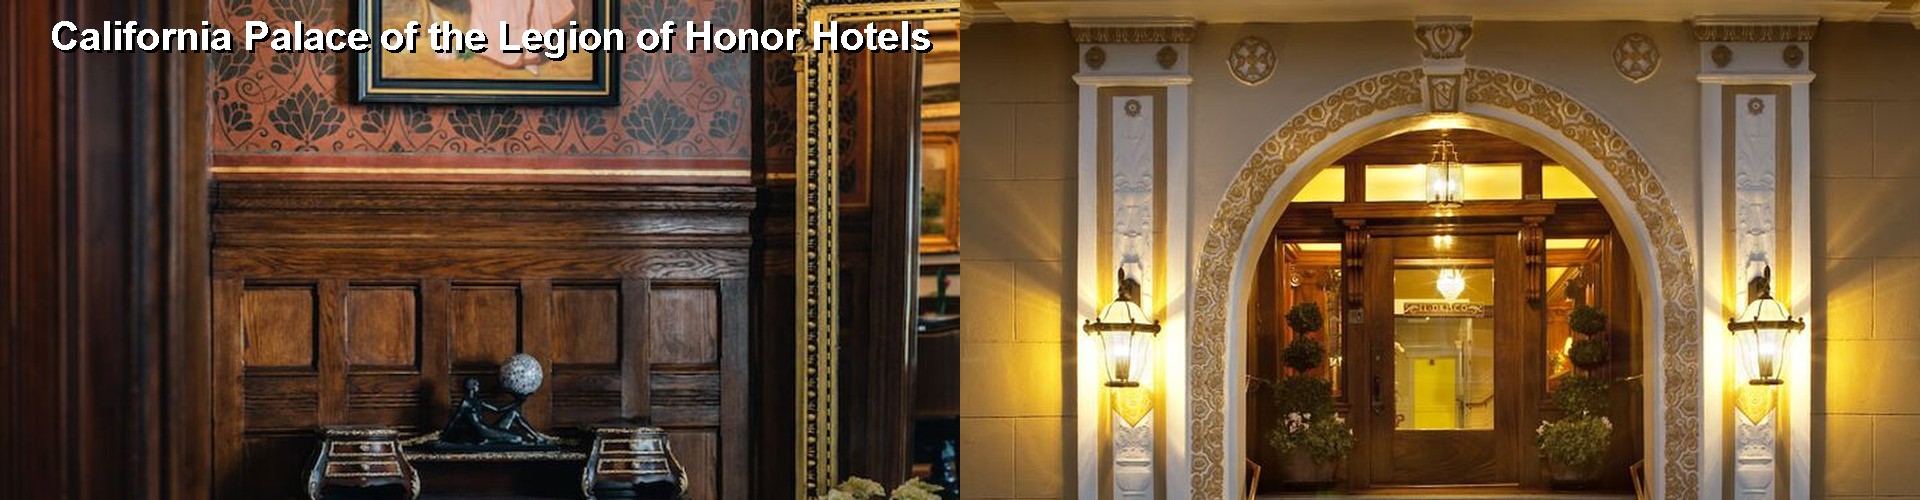 5 Best Hotels near California Palace of the Legion of Honor